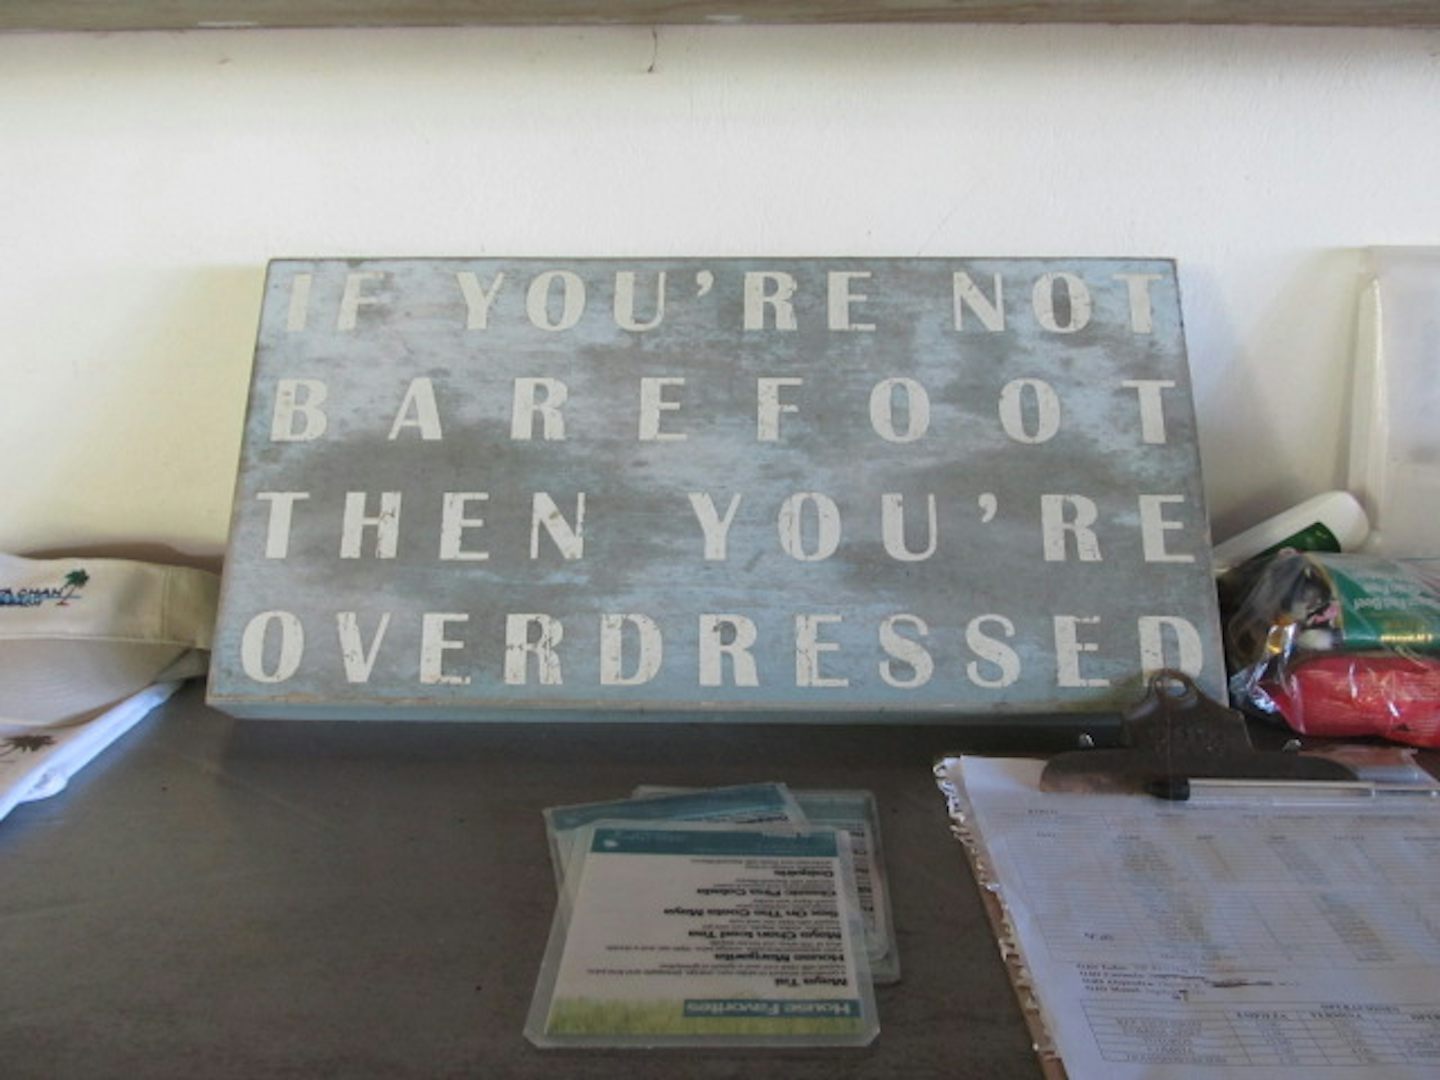 If you'e not barefoot, you're overdressed!